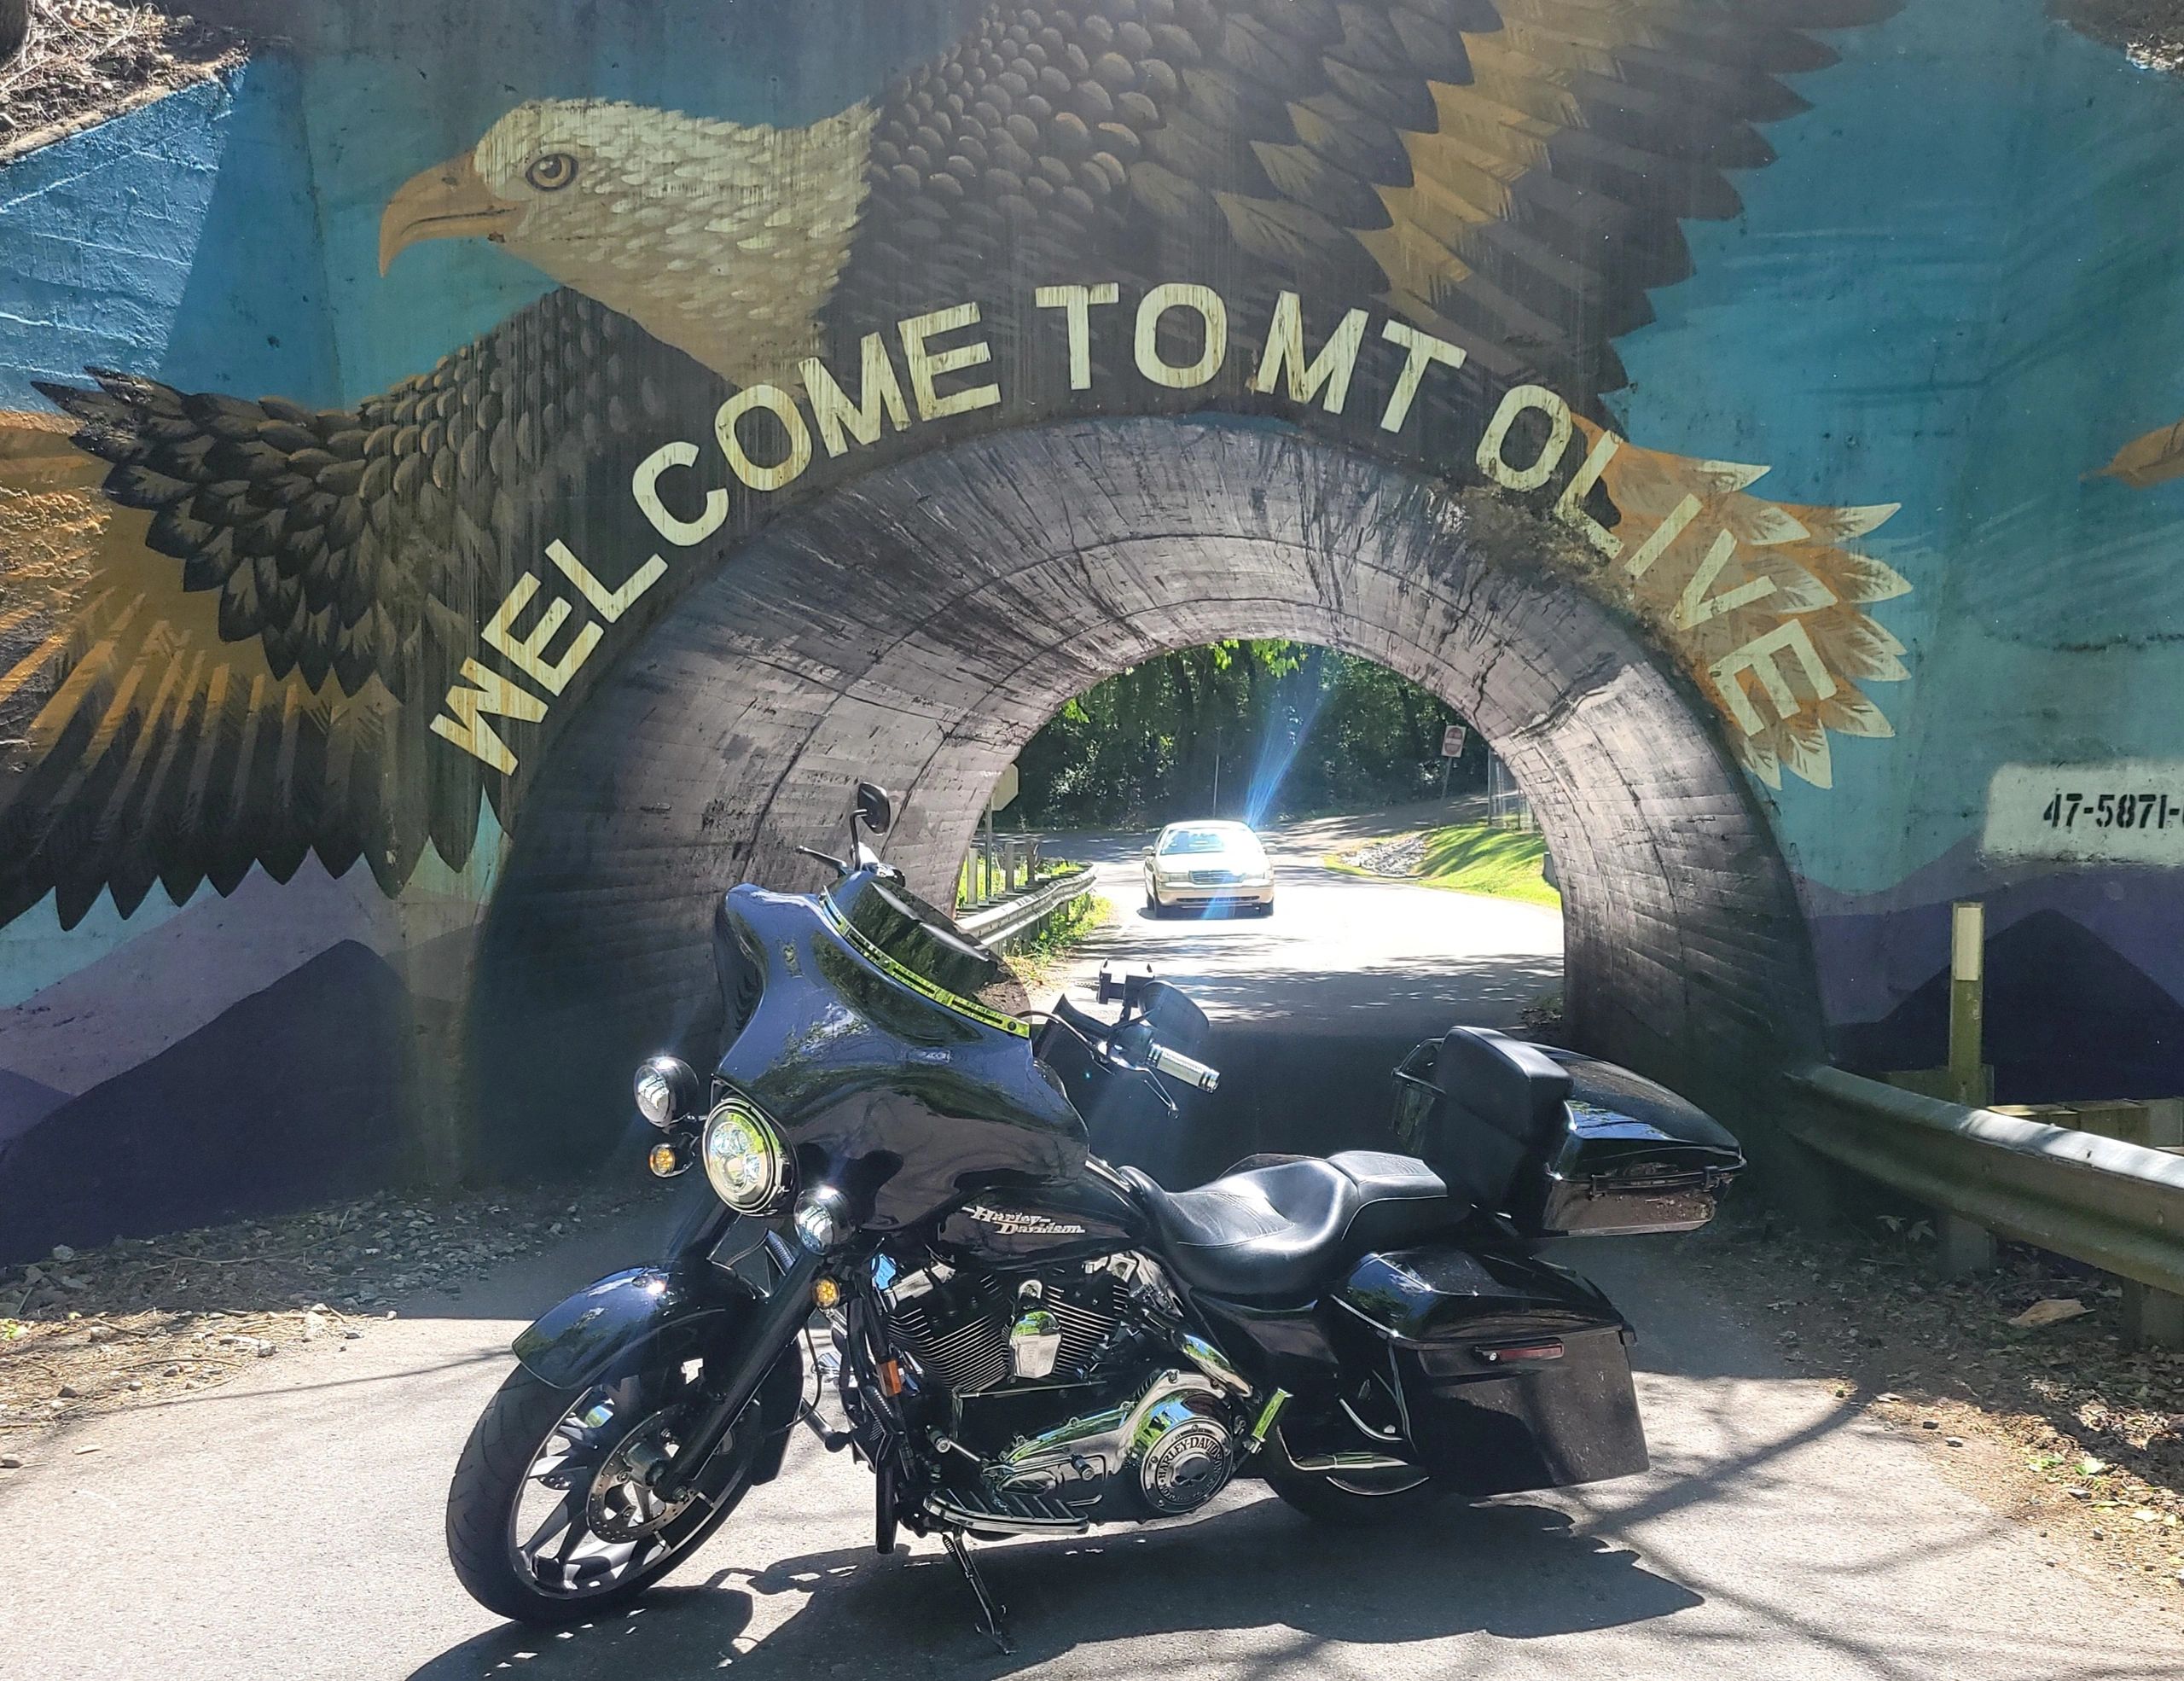 Rent Harley Street Glide Maryville, TN @ Welcome to Mount Olive tunnel, Knoxville, TN